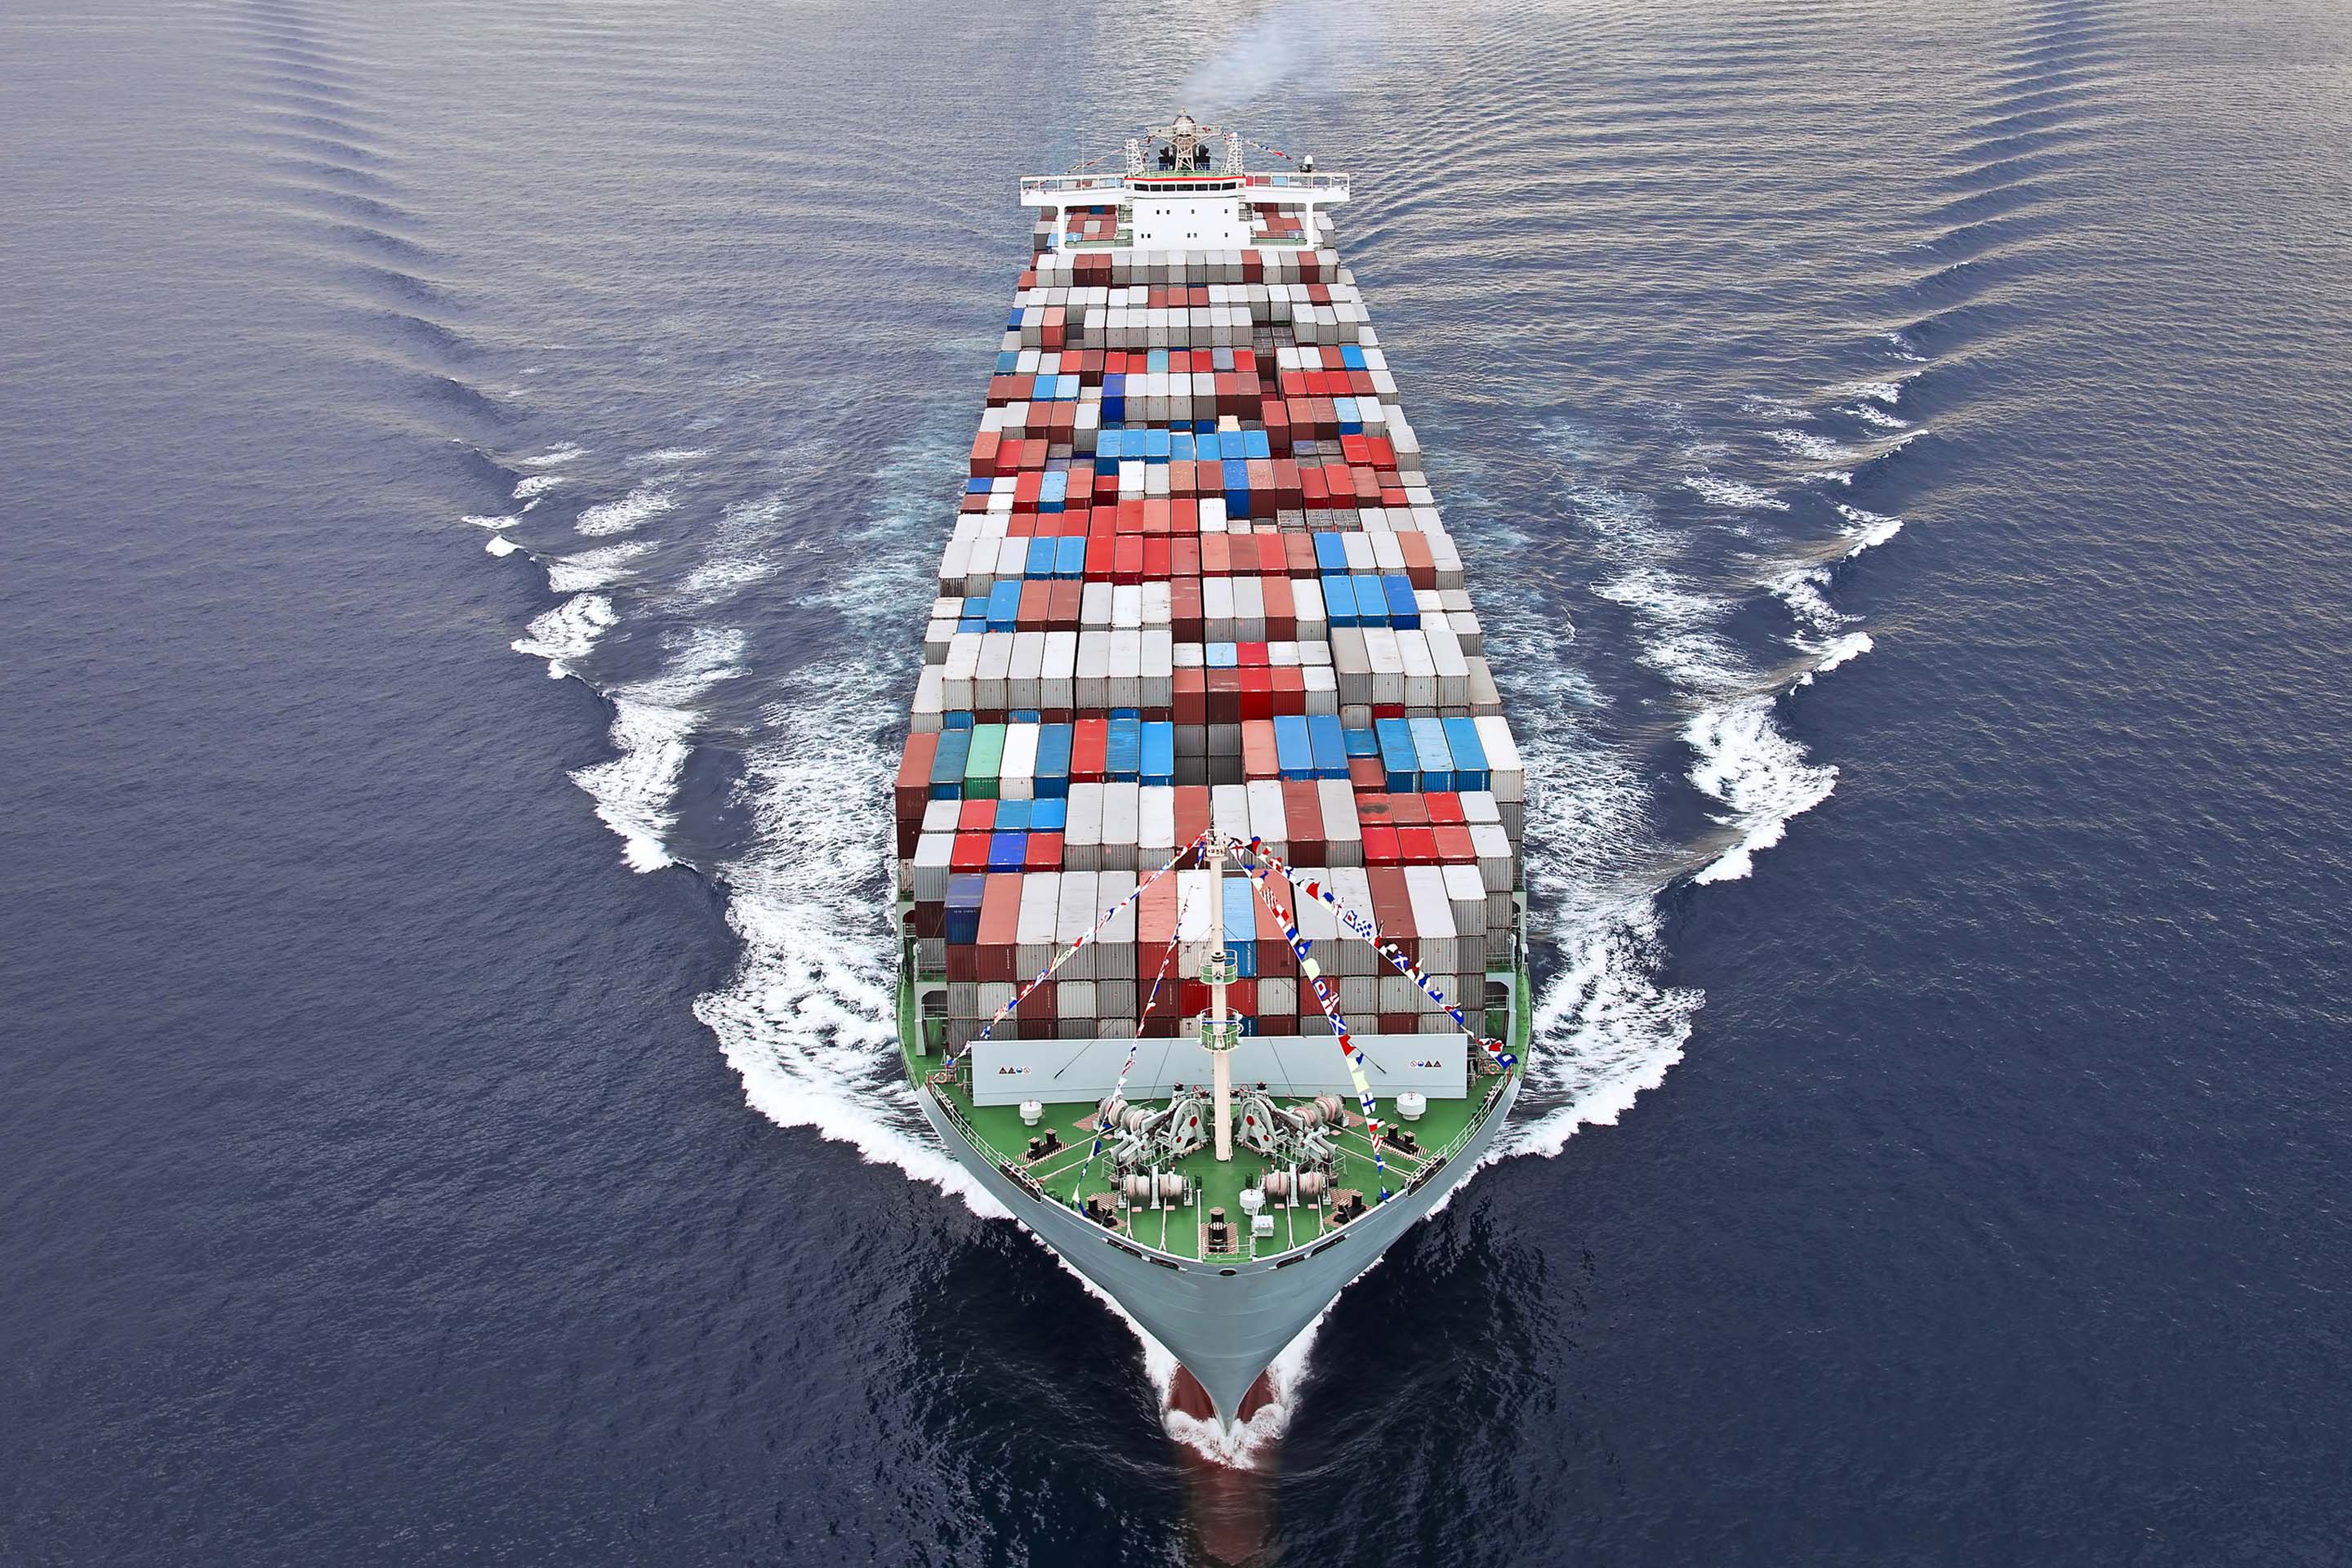 An image of a container ship to highlight implementation of e-fuels in shipping